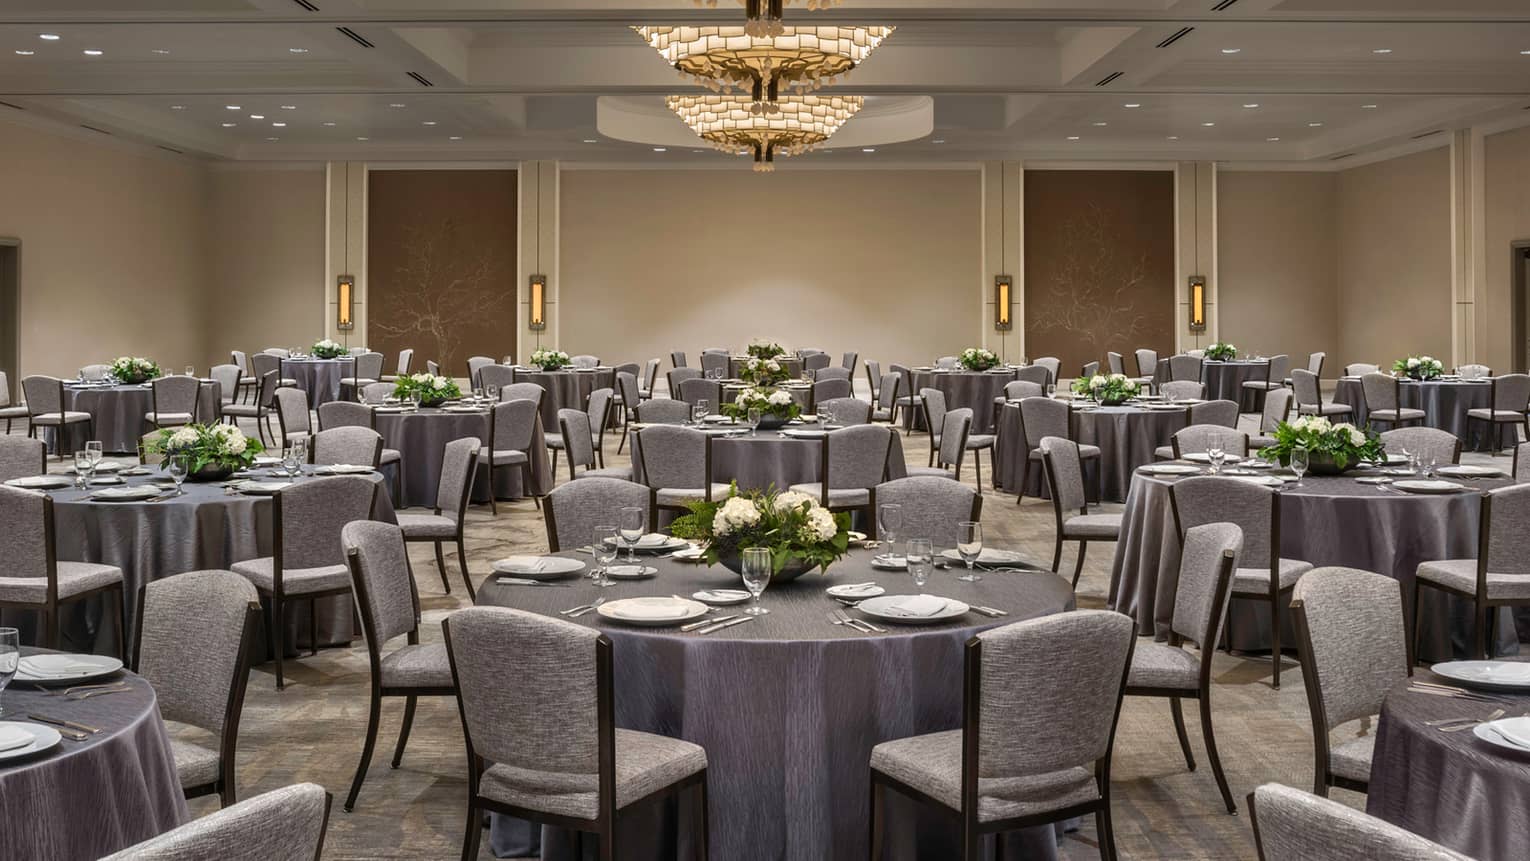 Round banquet tables with grey linens, chairs in ballroom